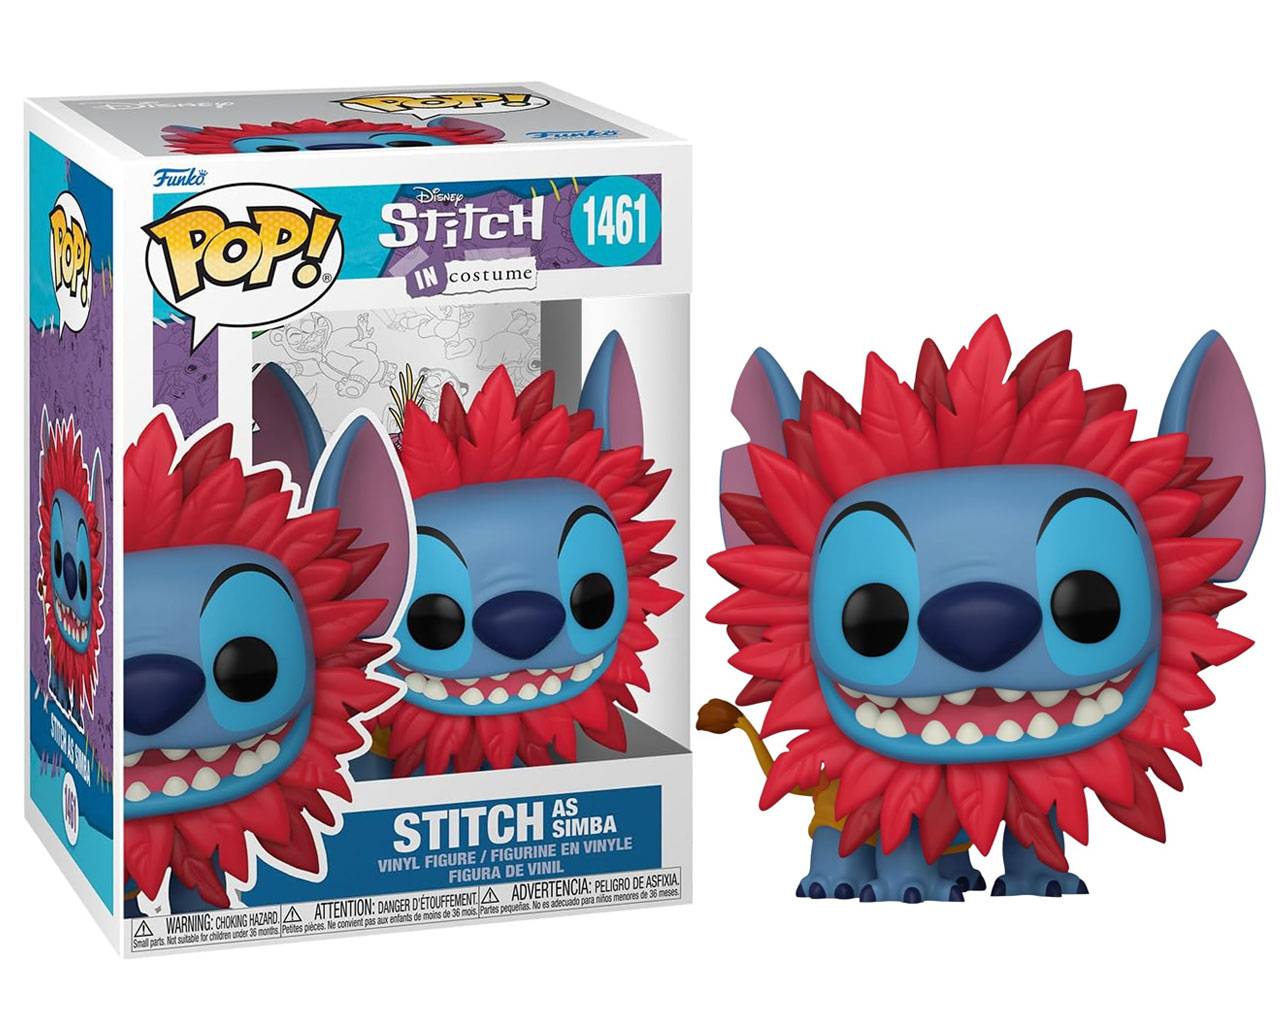 Stitch as Simba (The Lion King) - Stitch in Costume Pop! Vinyl